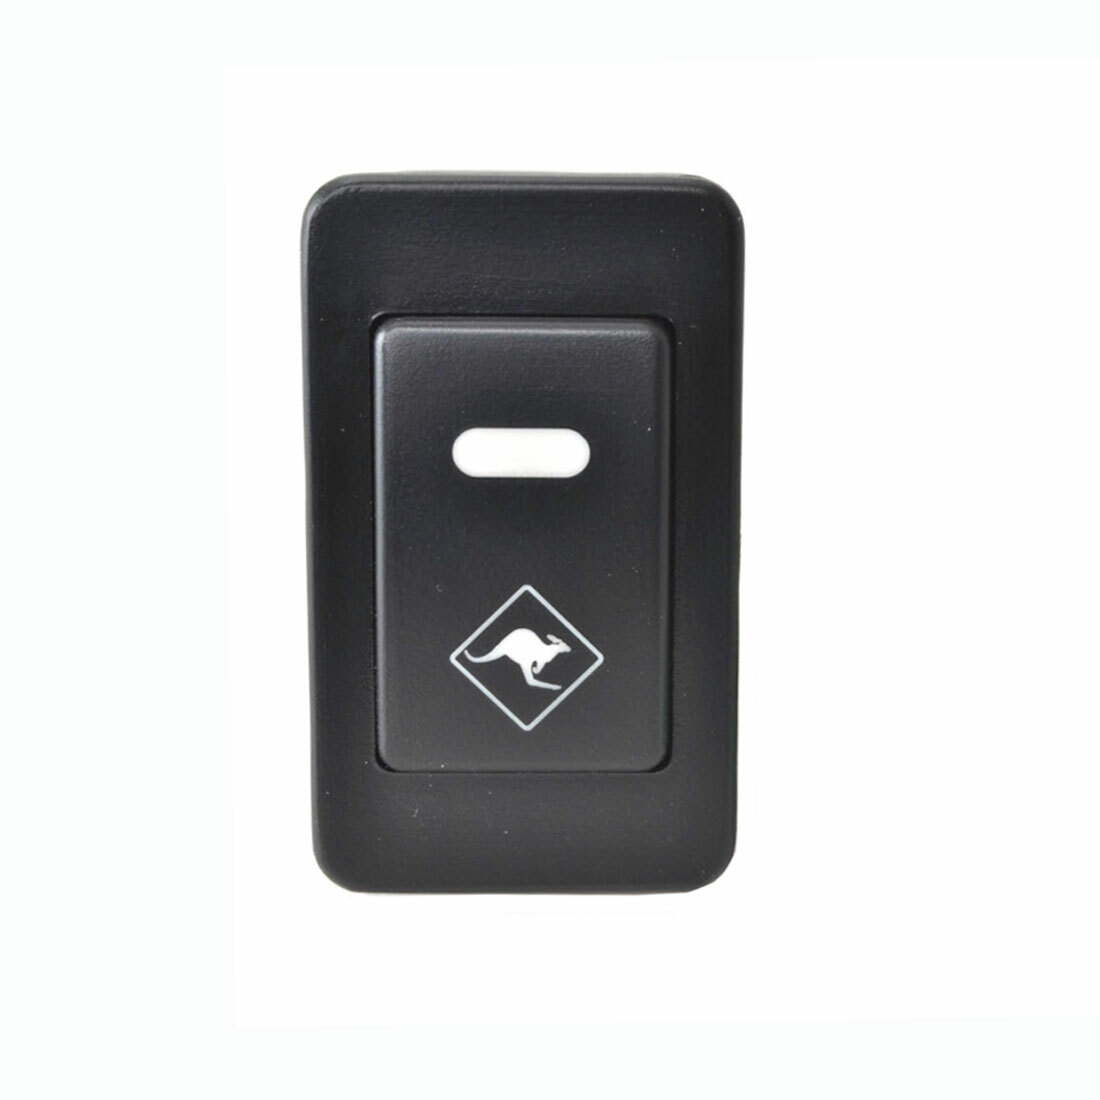 Nissan GQ To Series 3 GU On-Off Switch Up To Series 3 12v 3 Amp Lightforce Logo image